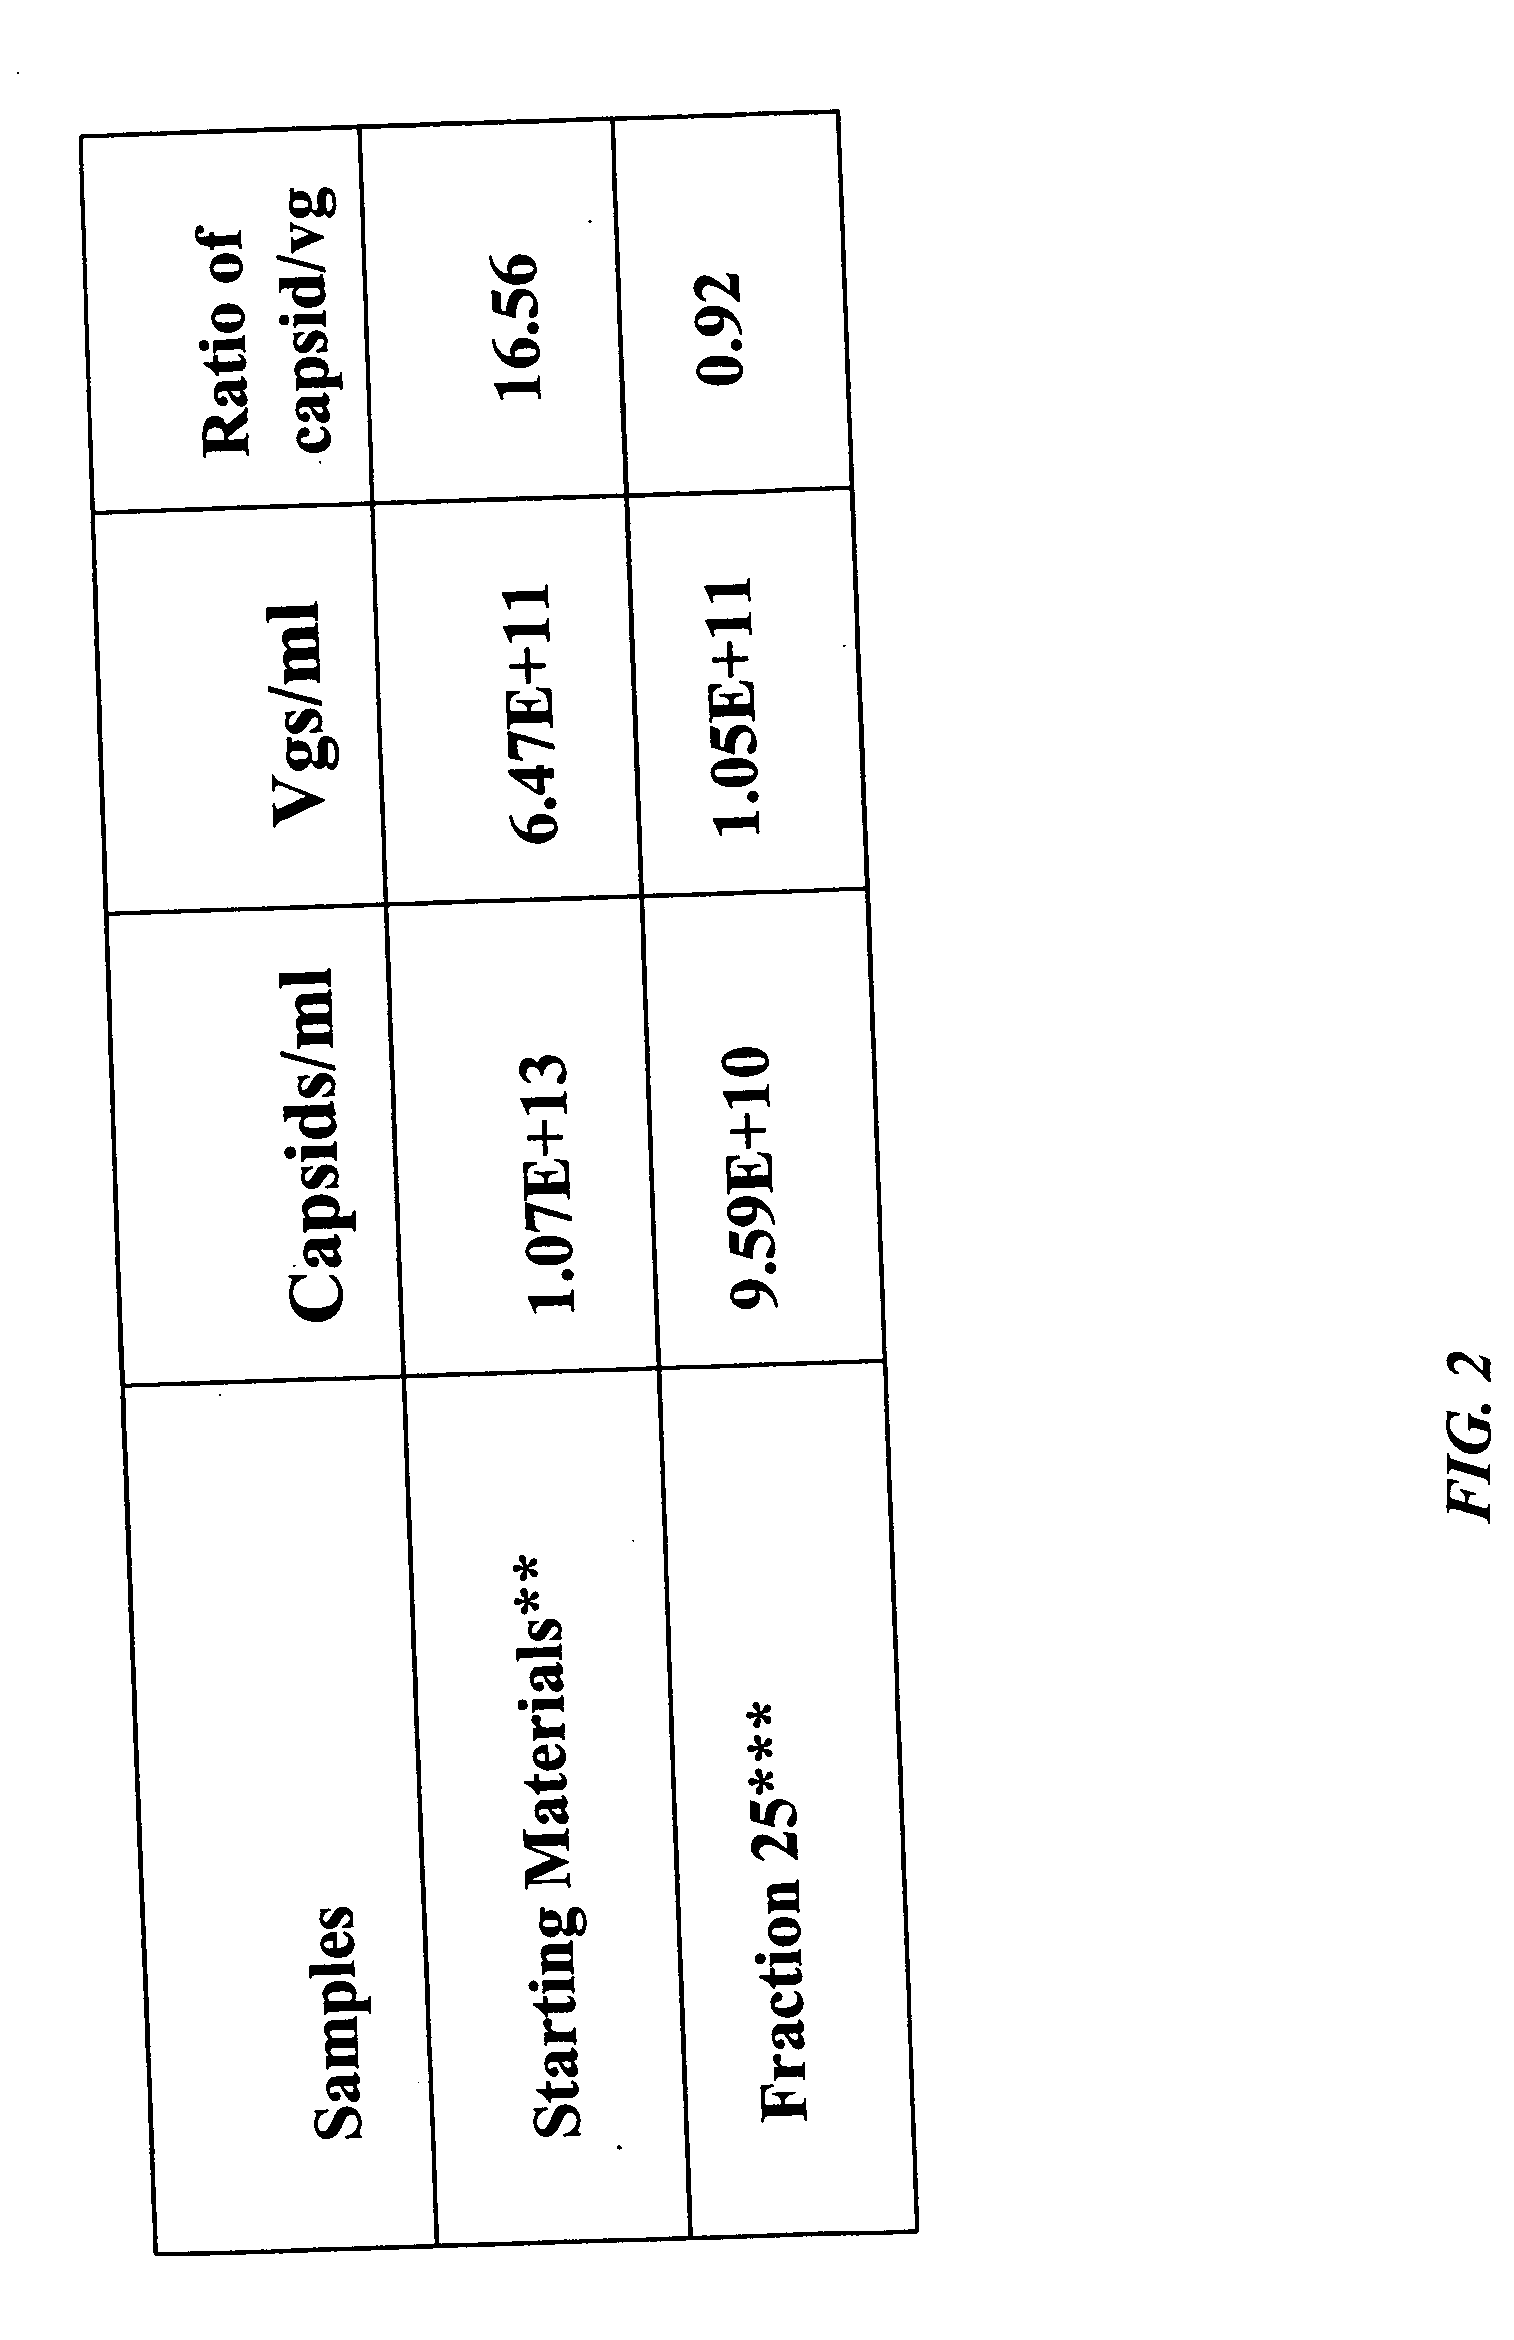 Methods for producing preparations of recombinant AAV virions substantially free of empty capsids